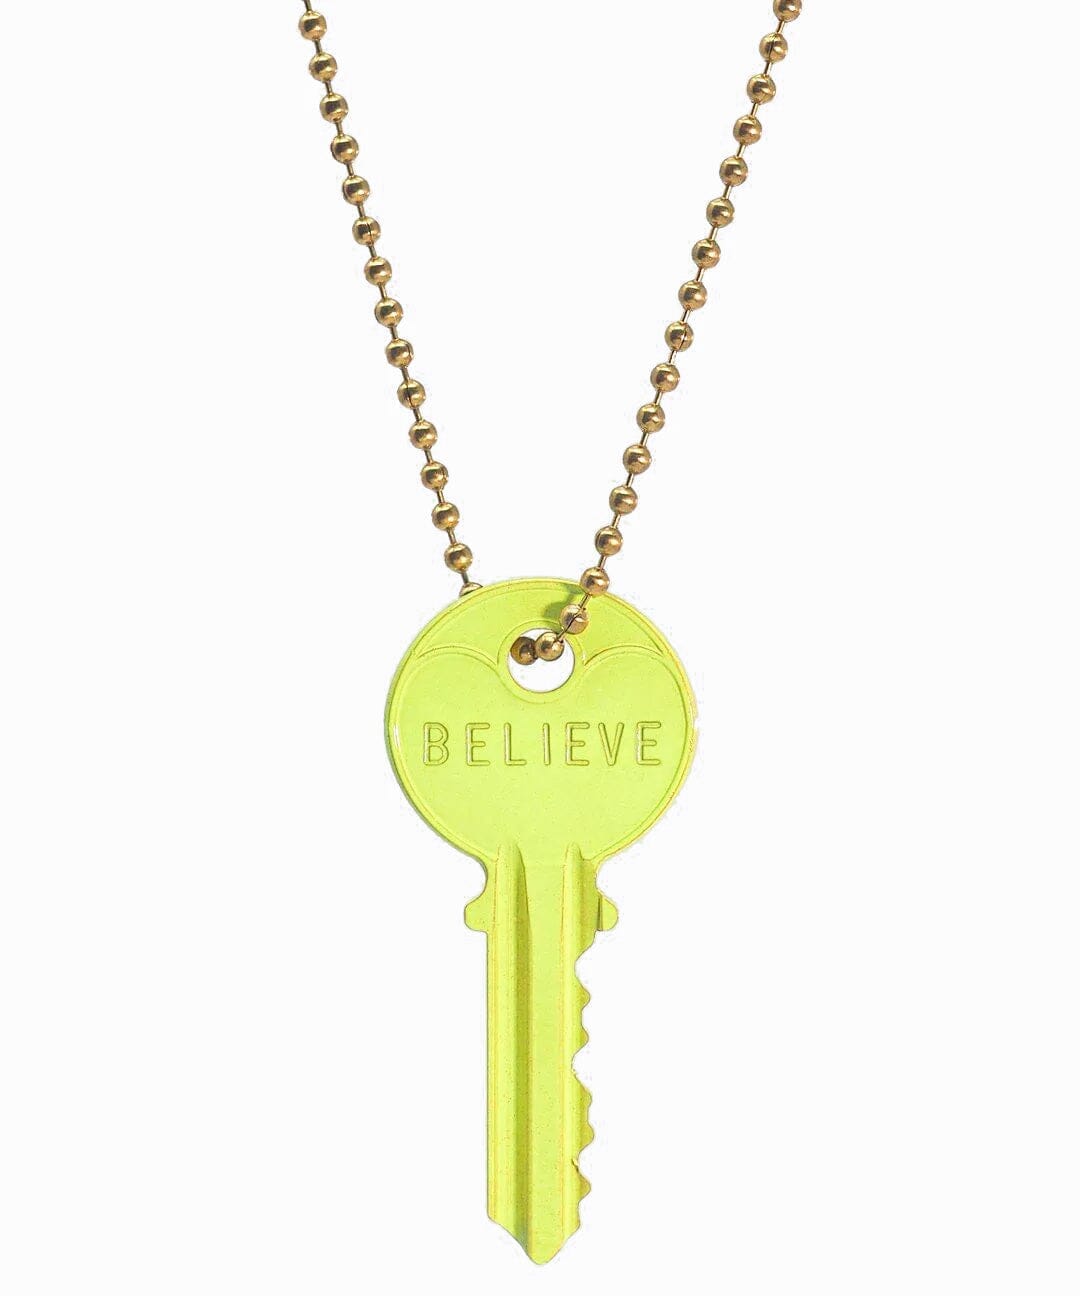 N - Neon Yellow Classic Ball Chain Key Necklace Necklaces The Giving Keys GOLD 